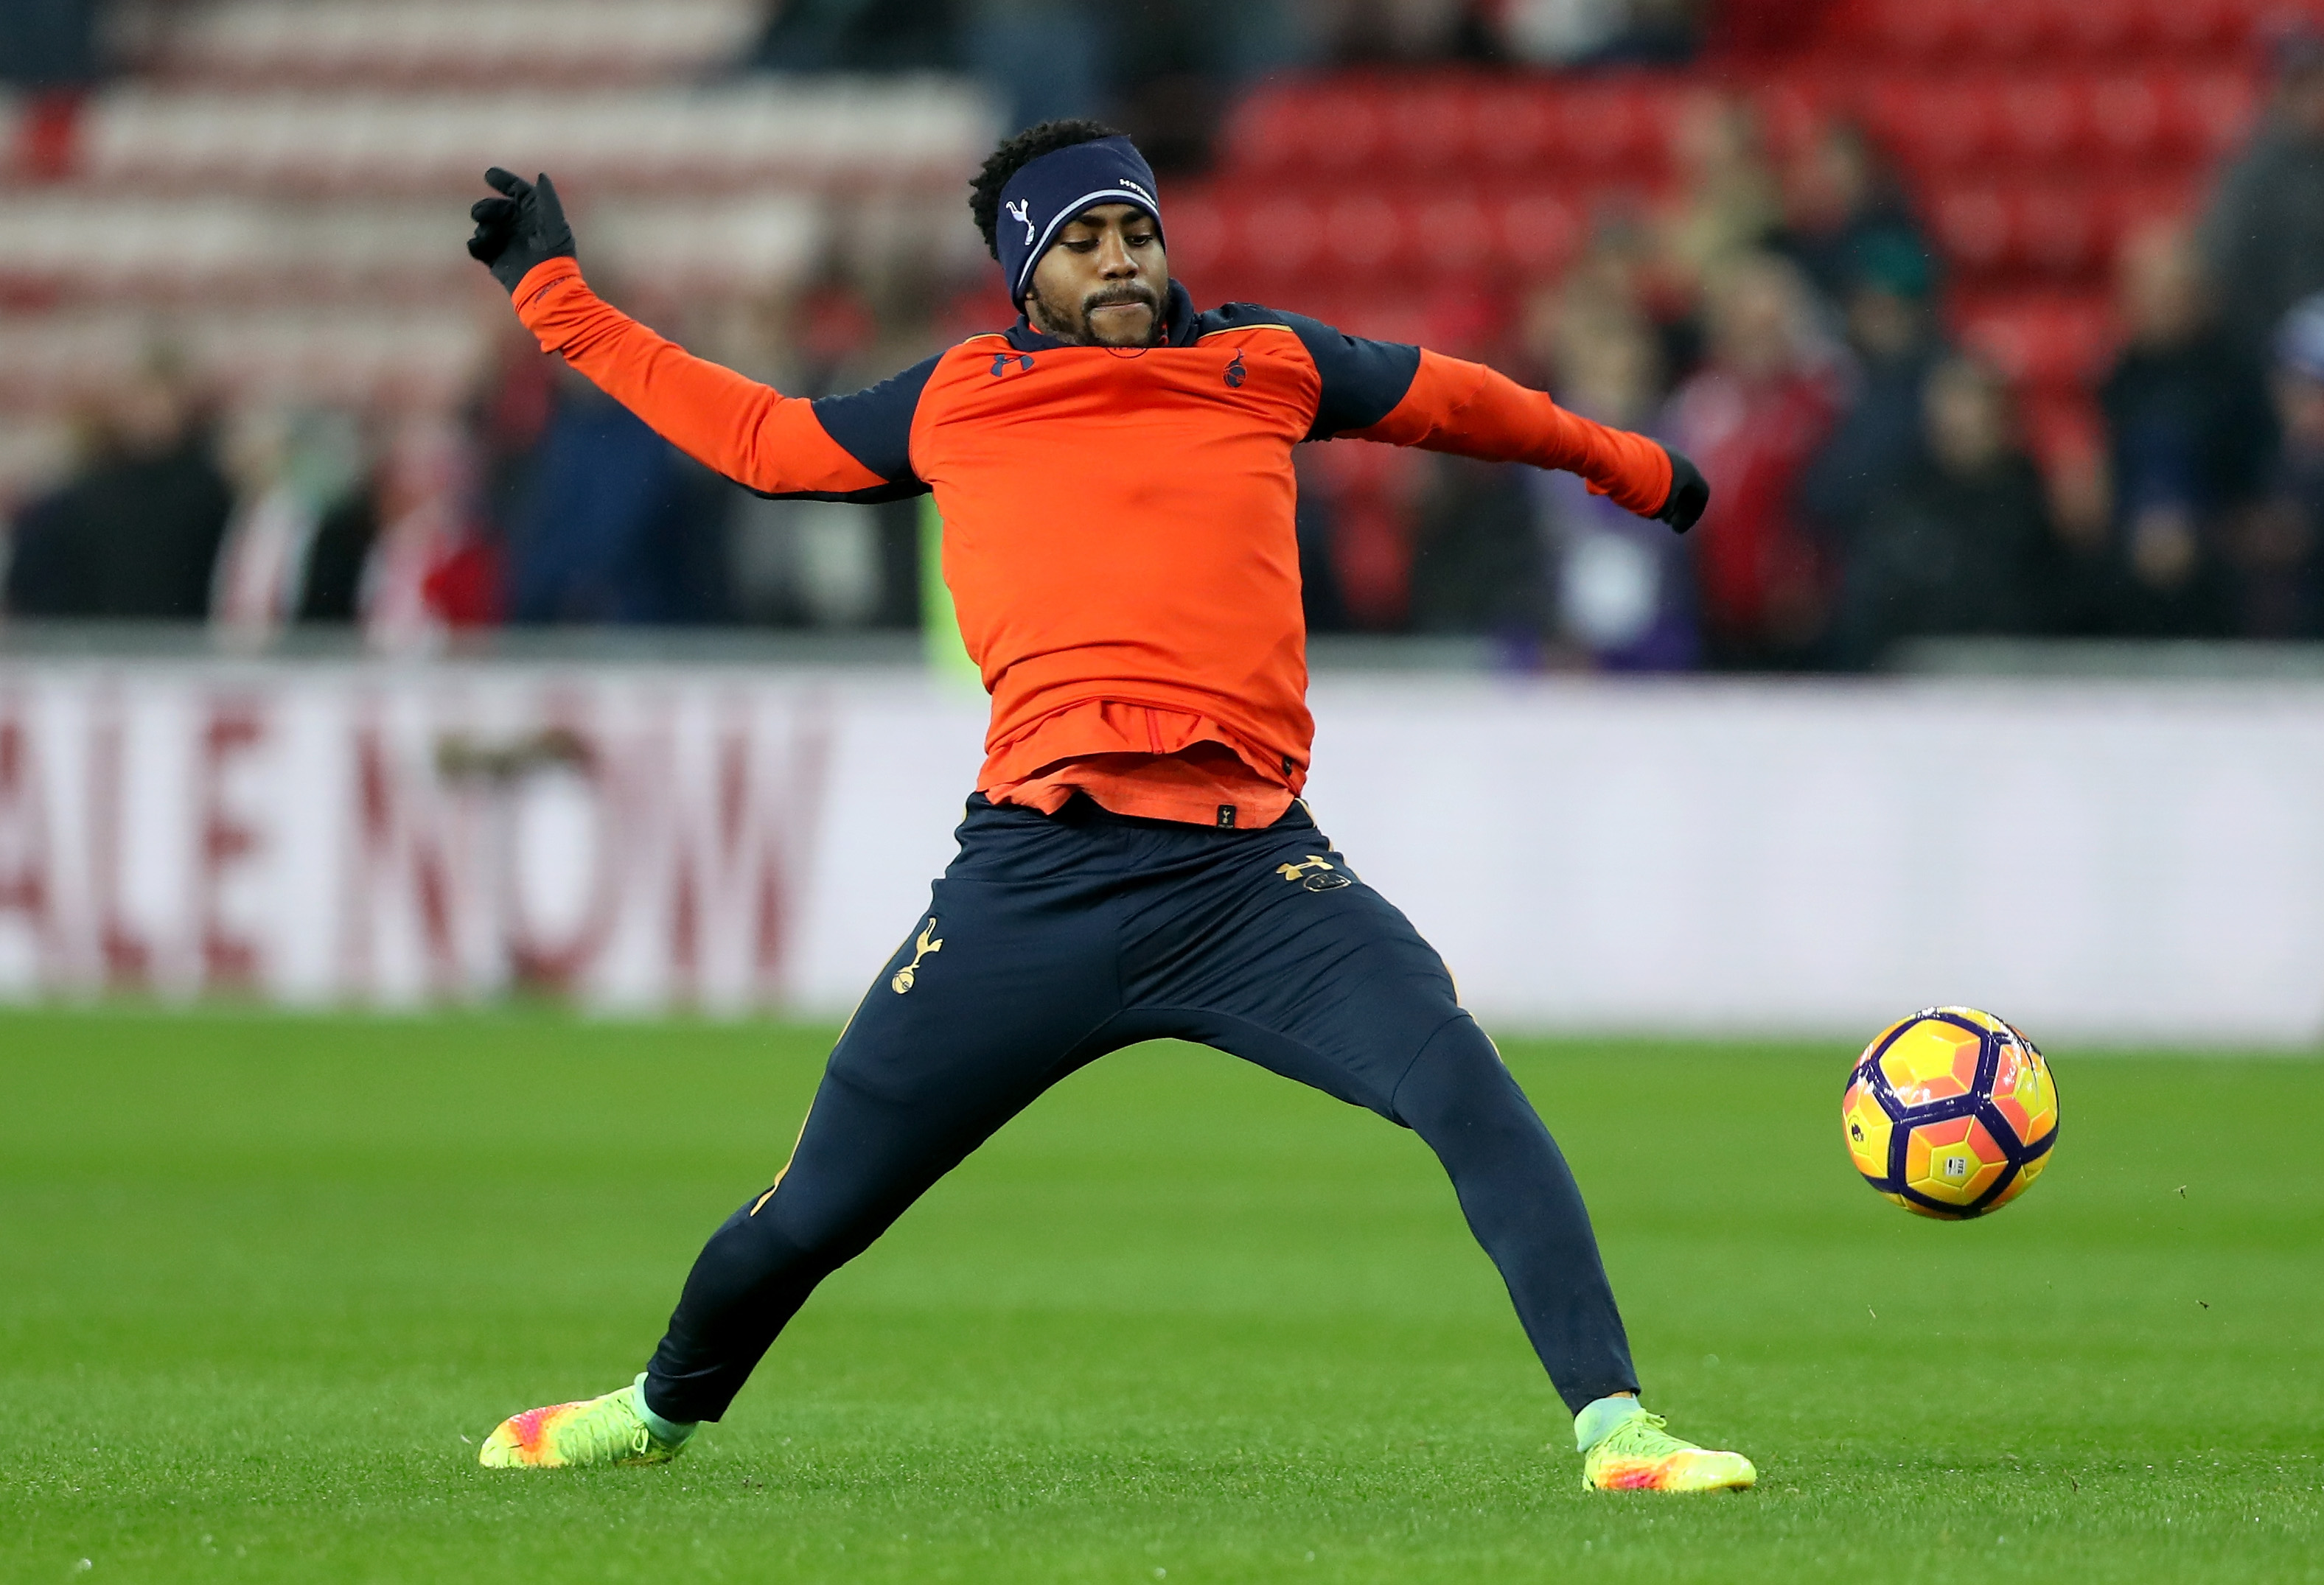 SUNDERLAND, ENGLAND - JANUARY 31:  Danny Rose of Tottenham Hotspur warms up prior to the Premier League match between Sunderland and Tottenham Hotspur at Stadium of Light on January 31, 2017 in Sunderland, England.  (Photo by Ian MacNicol/Getty Images)